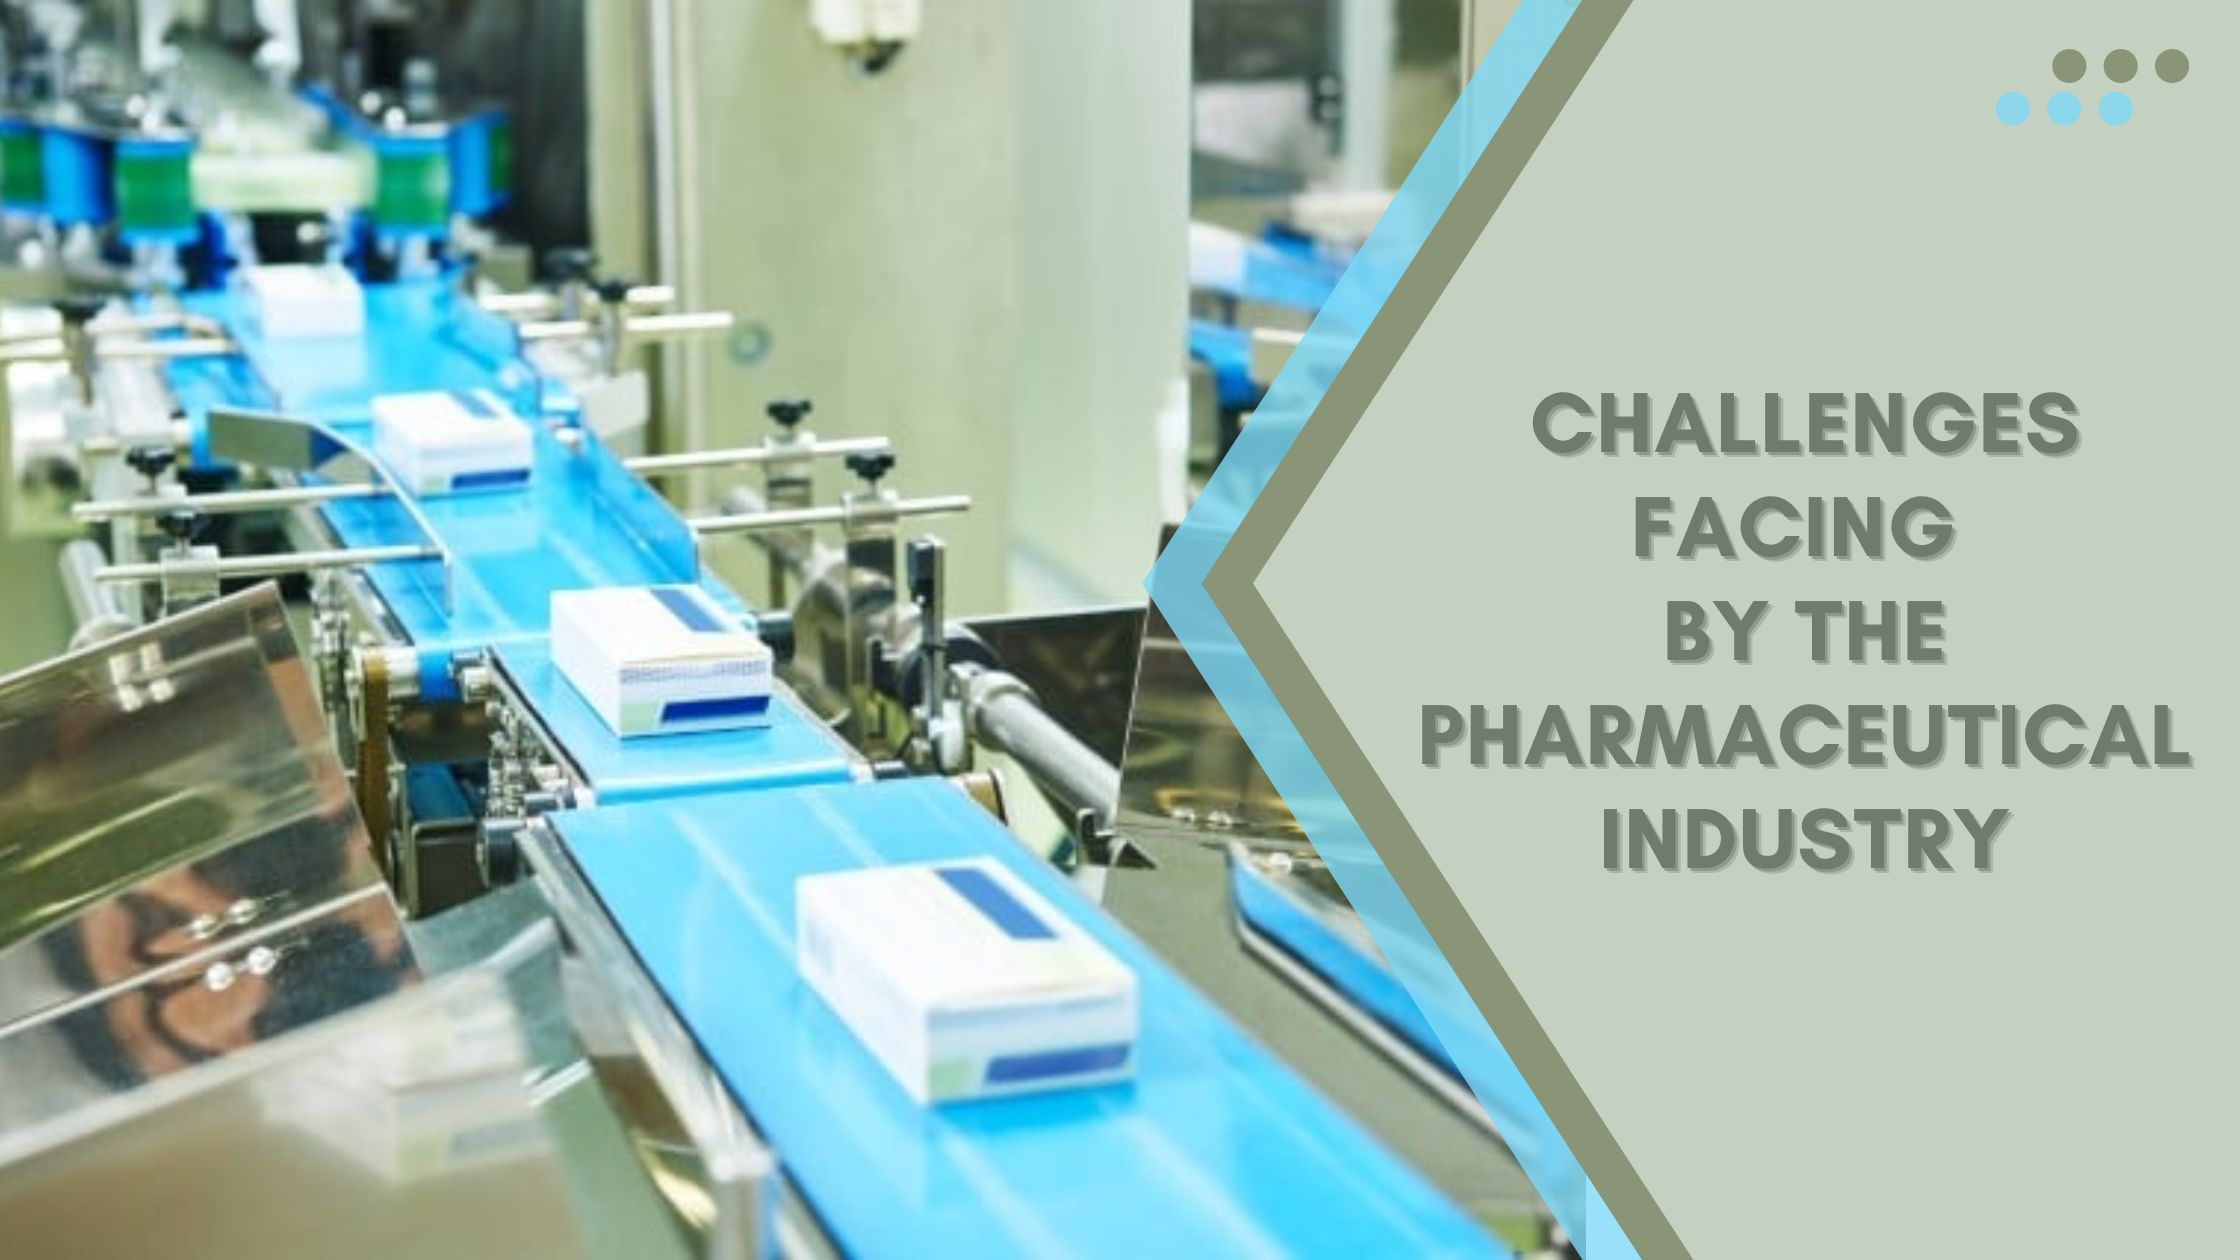 Challenges Facing By The Pharmaceutical Industry